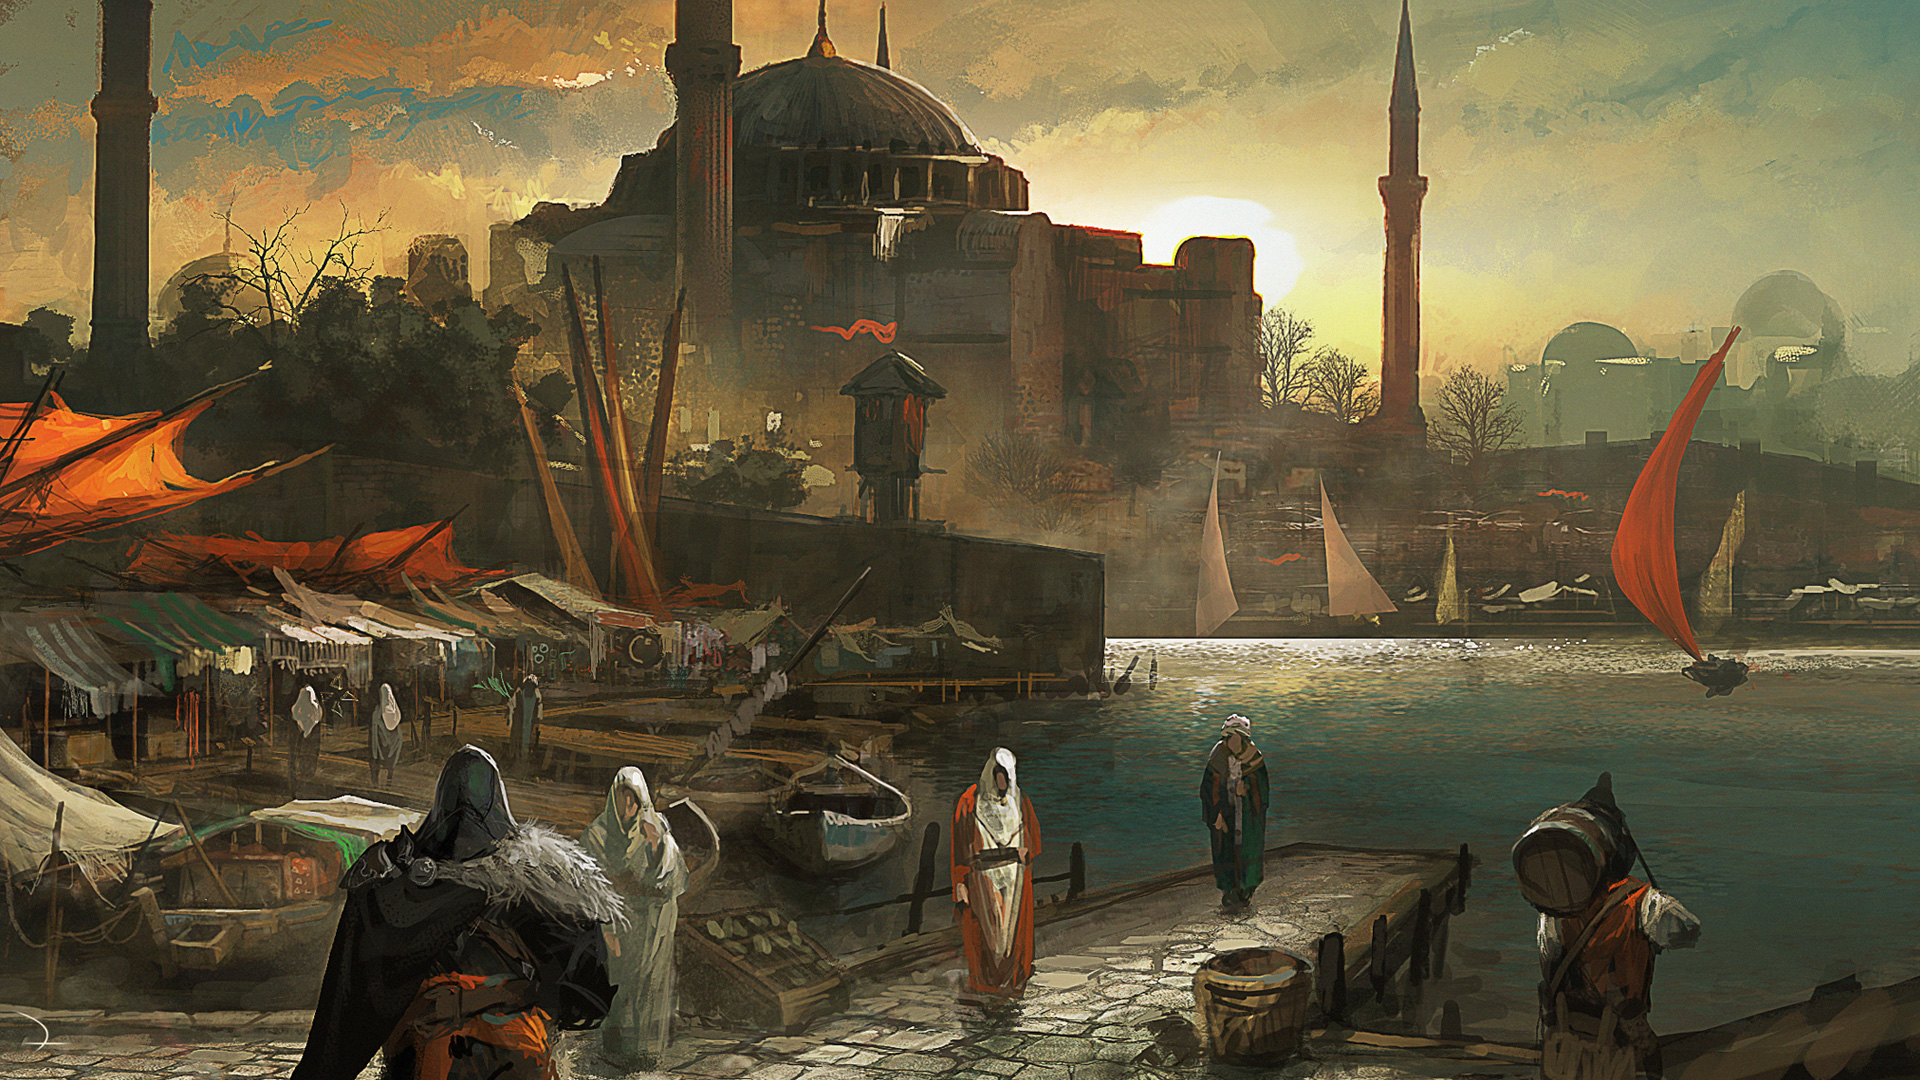 assassin's creed wallpaper,action adventure game,pc game,strategy video game,painting,adventure game